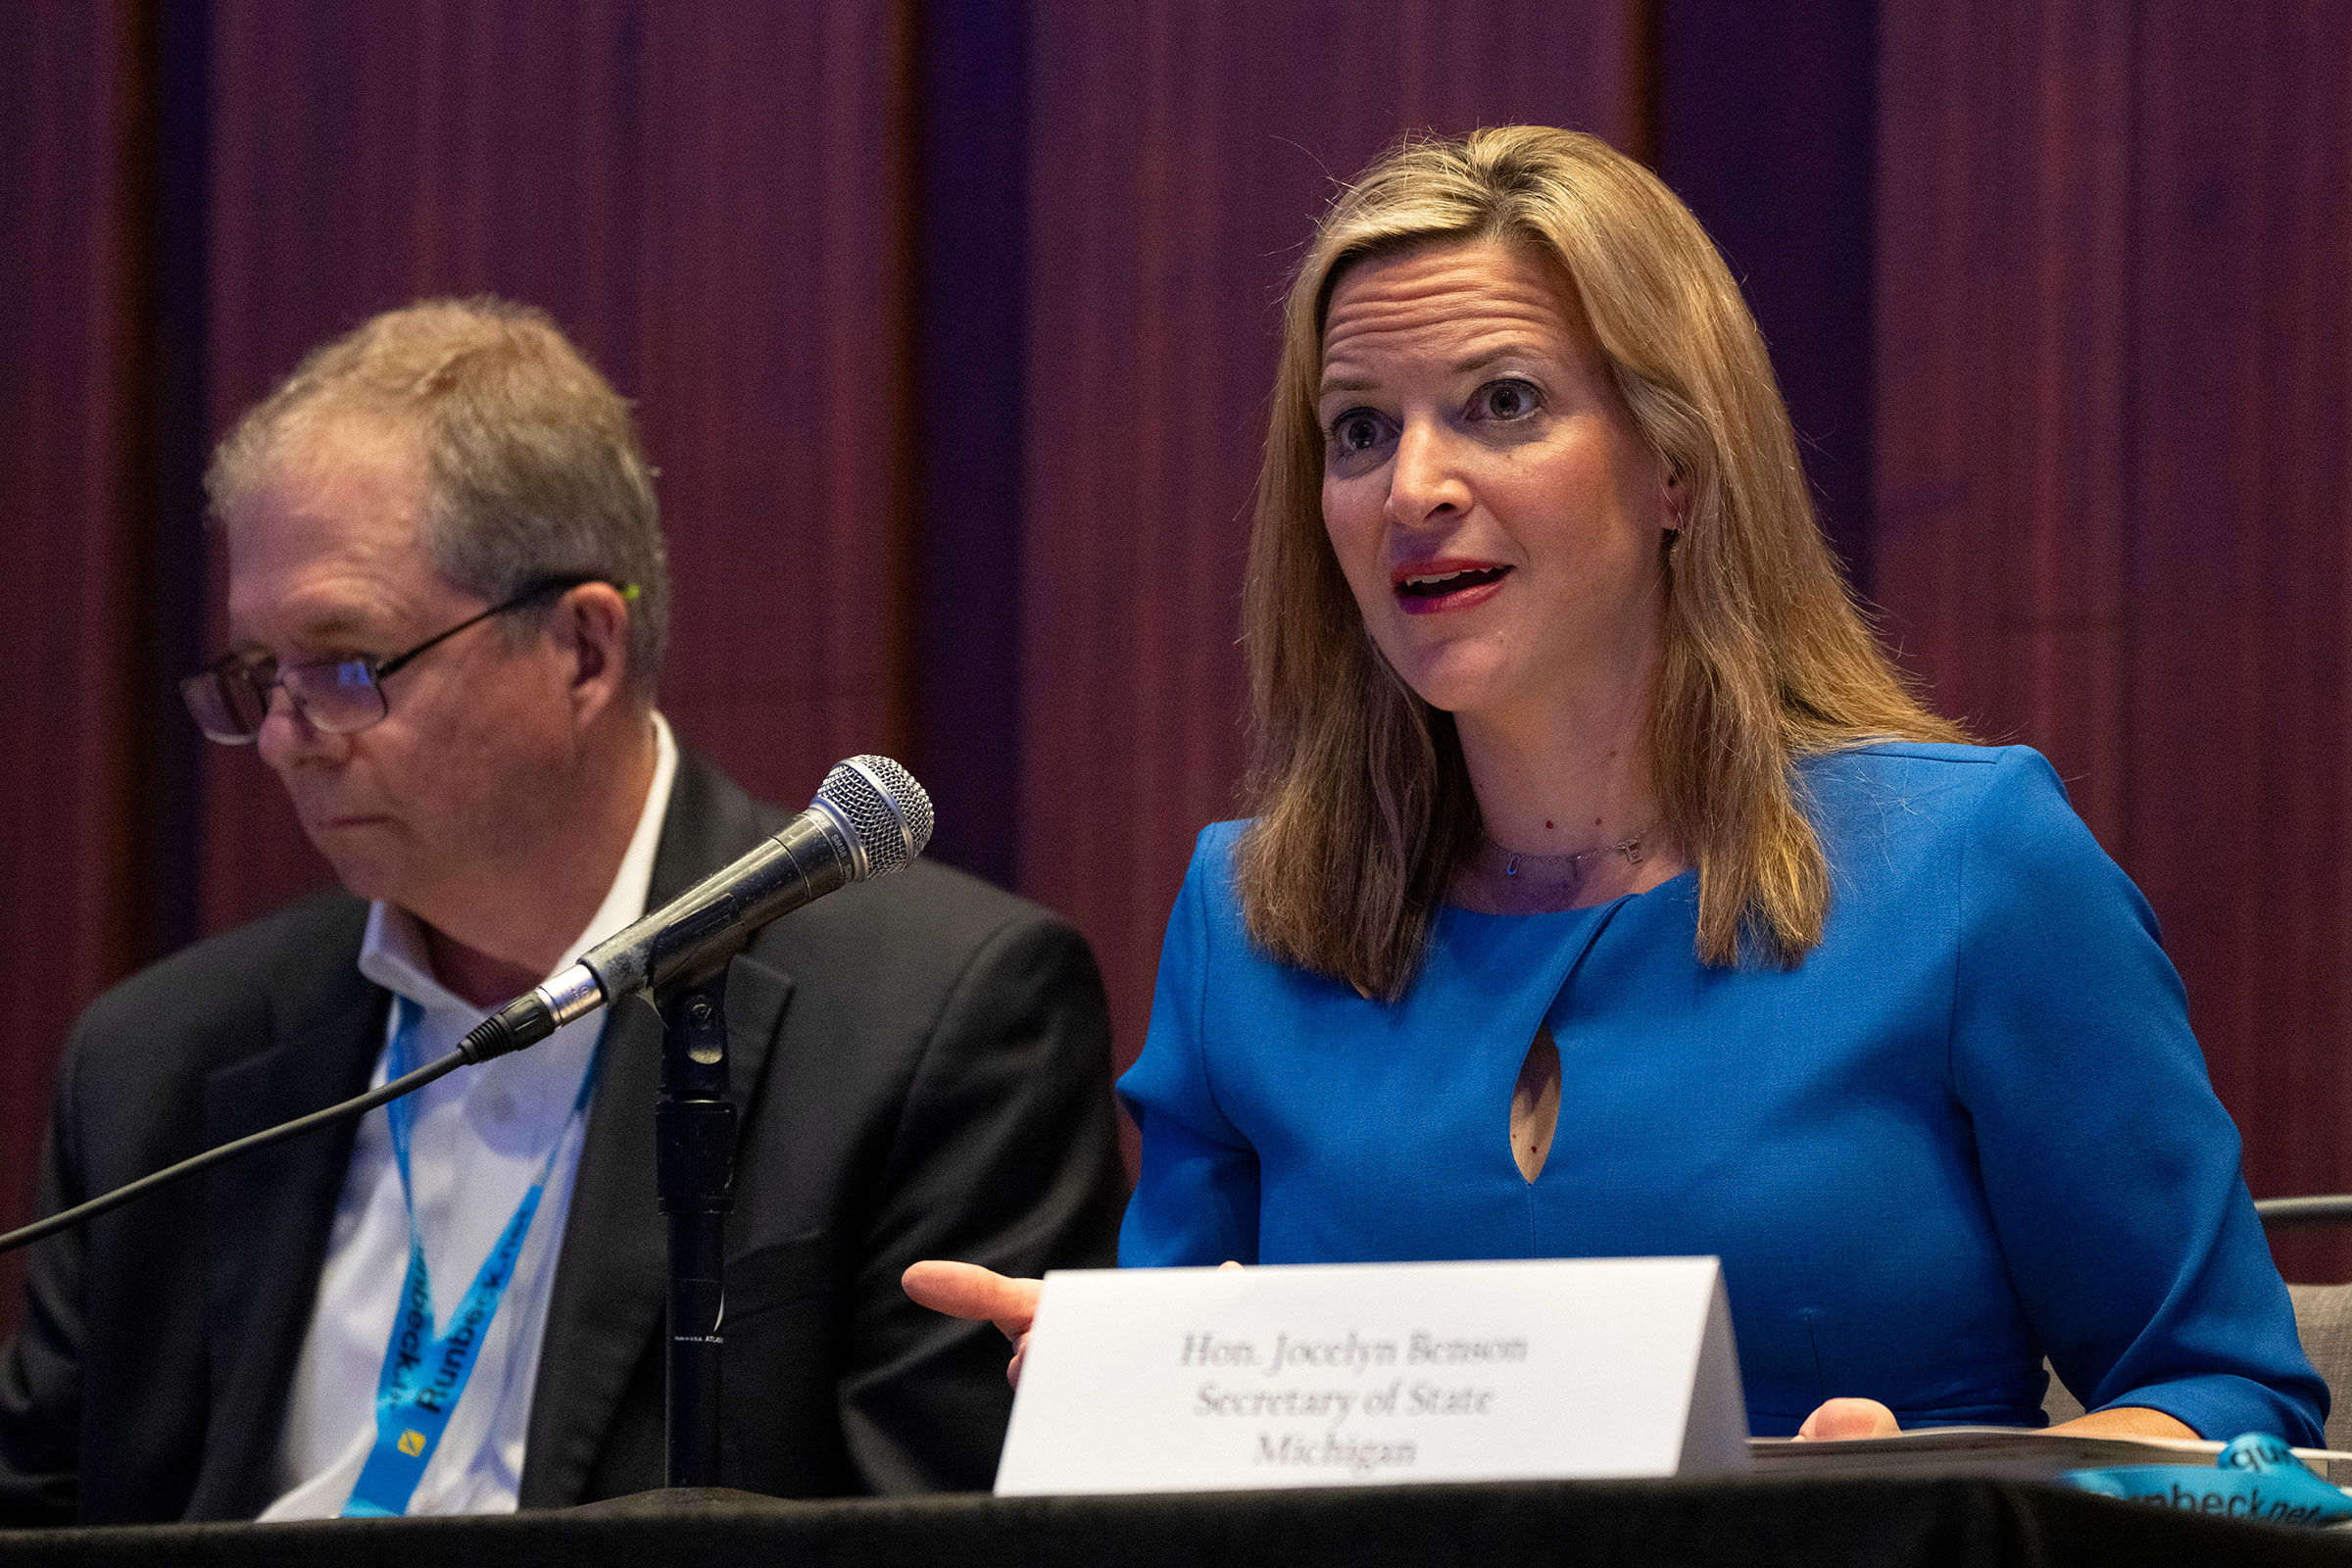 Michigan Secretary of State Jocelyn Benson attends a panel about elections during the summer meeting of the National Association of Secretaries of State in July 2023 in Washington, DC.